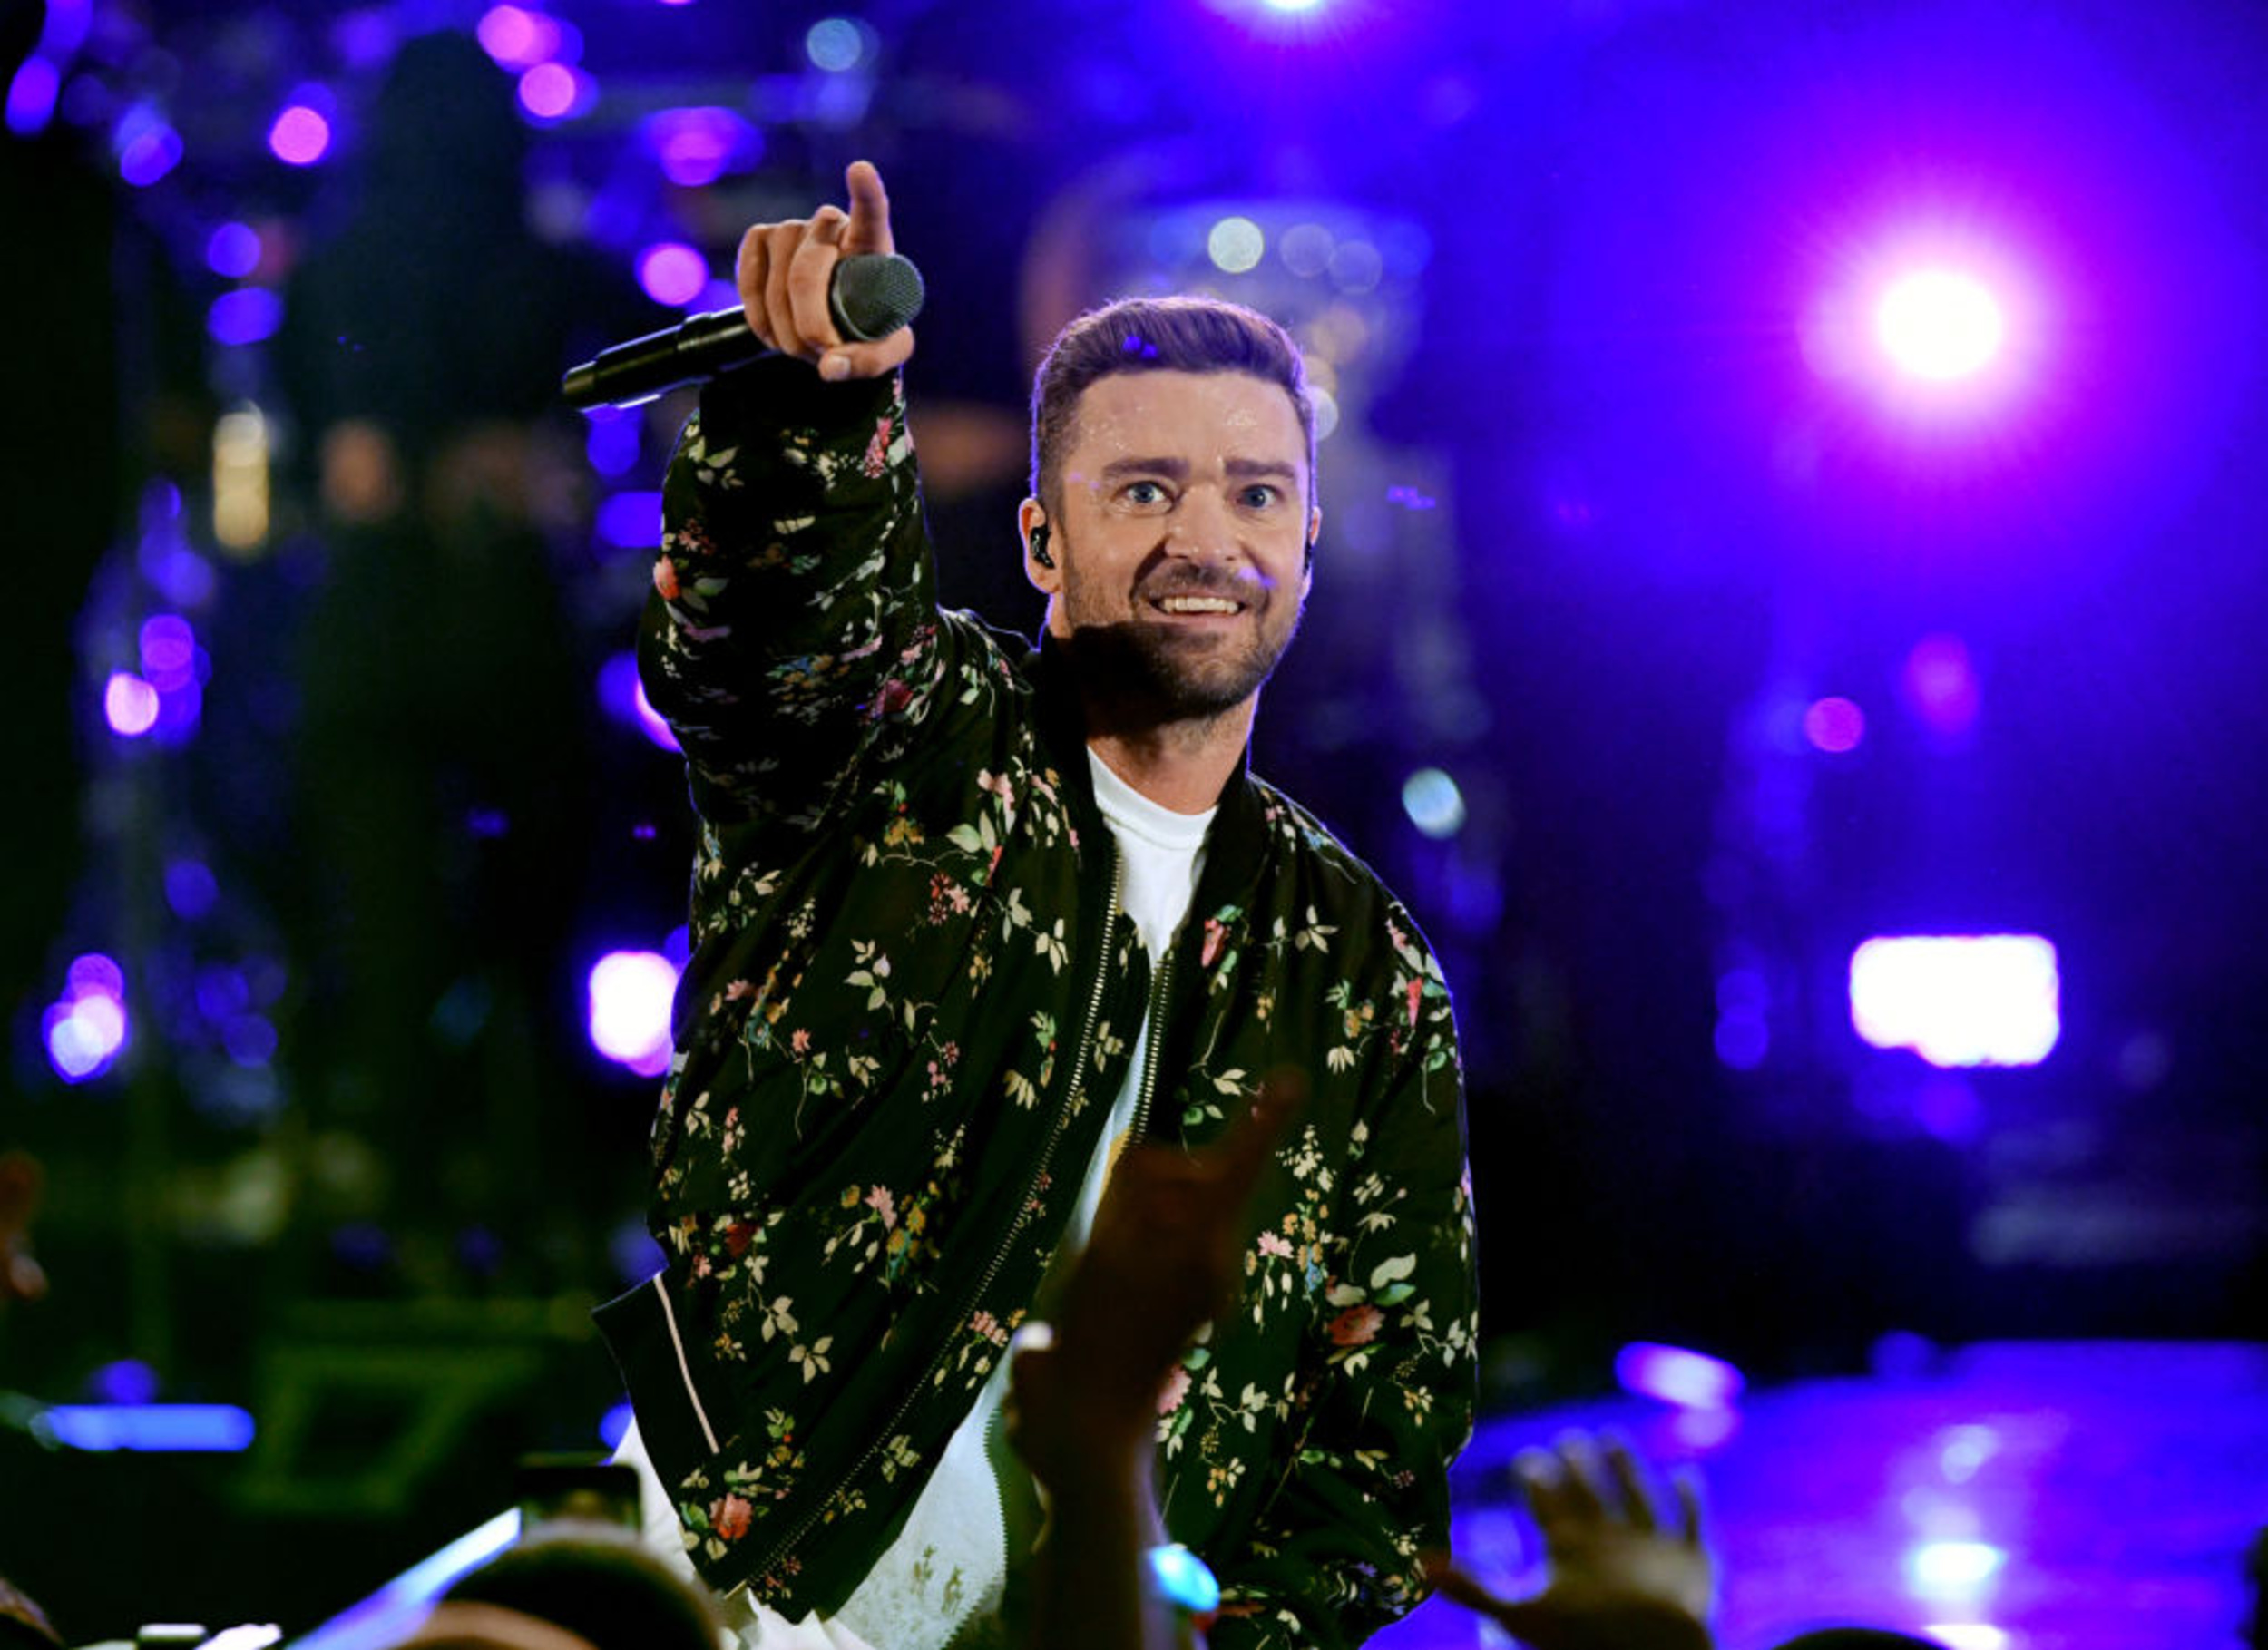 <p>After a six-year hiatus since his previous album <em>Man of the Woods,</em> Justin Timberlake is back with his sixth studio album <em>Everything I Thought I Was. </em>In support of his new album, Timberlake is hitting the road across North America with his "The Forget Tomorrow World Tour." The singer will start his trek on April 29th in Vancouver and end on July 9th in Kentucky. </p><p>You may also like: <a href='https://www.yardbarker.com/entertainment/articles/the_25_top_selling_rock_albums_of_all_time_040124/s1__39121793'>The 25 top-selling rock albums of all time</a></p>